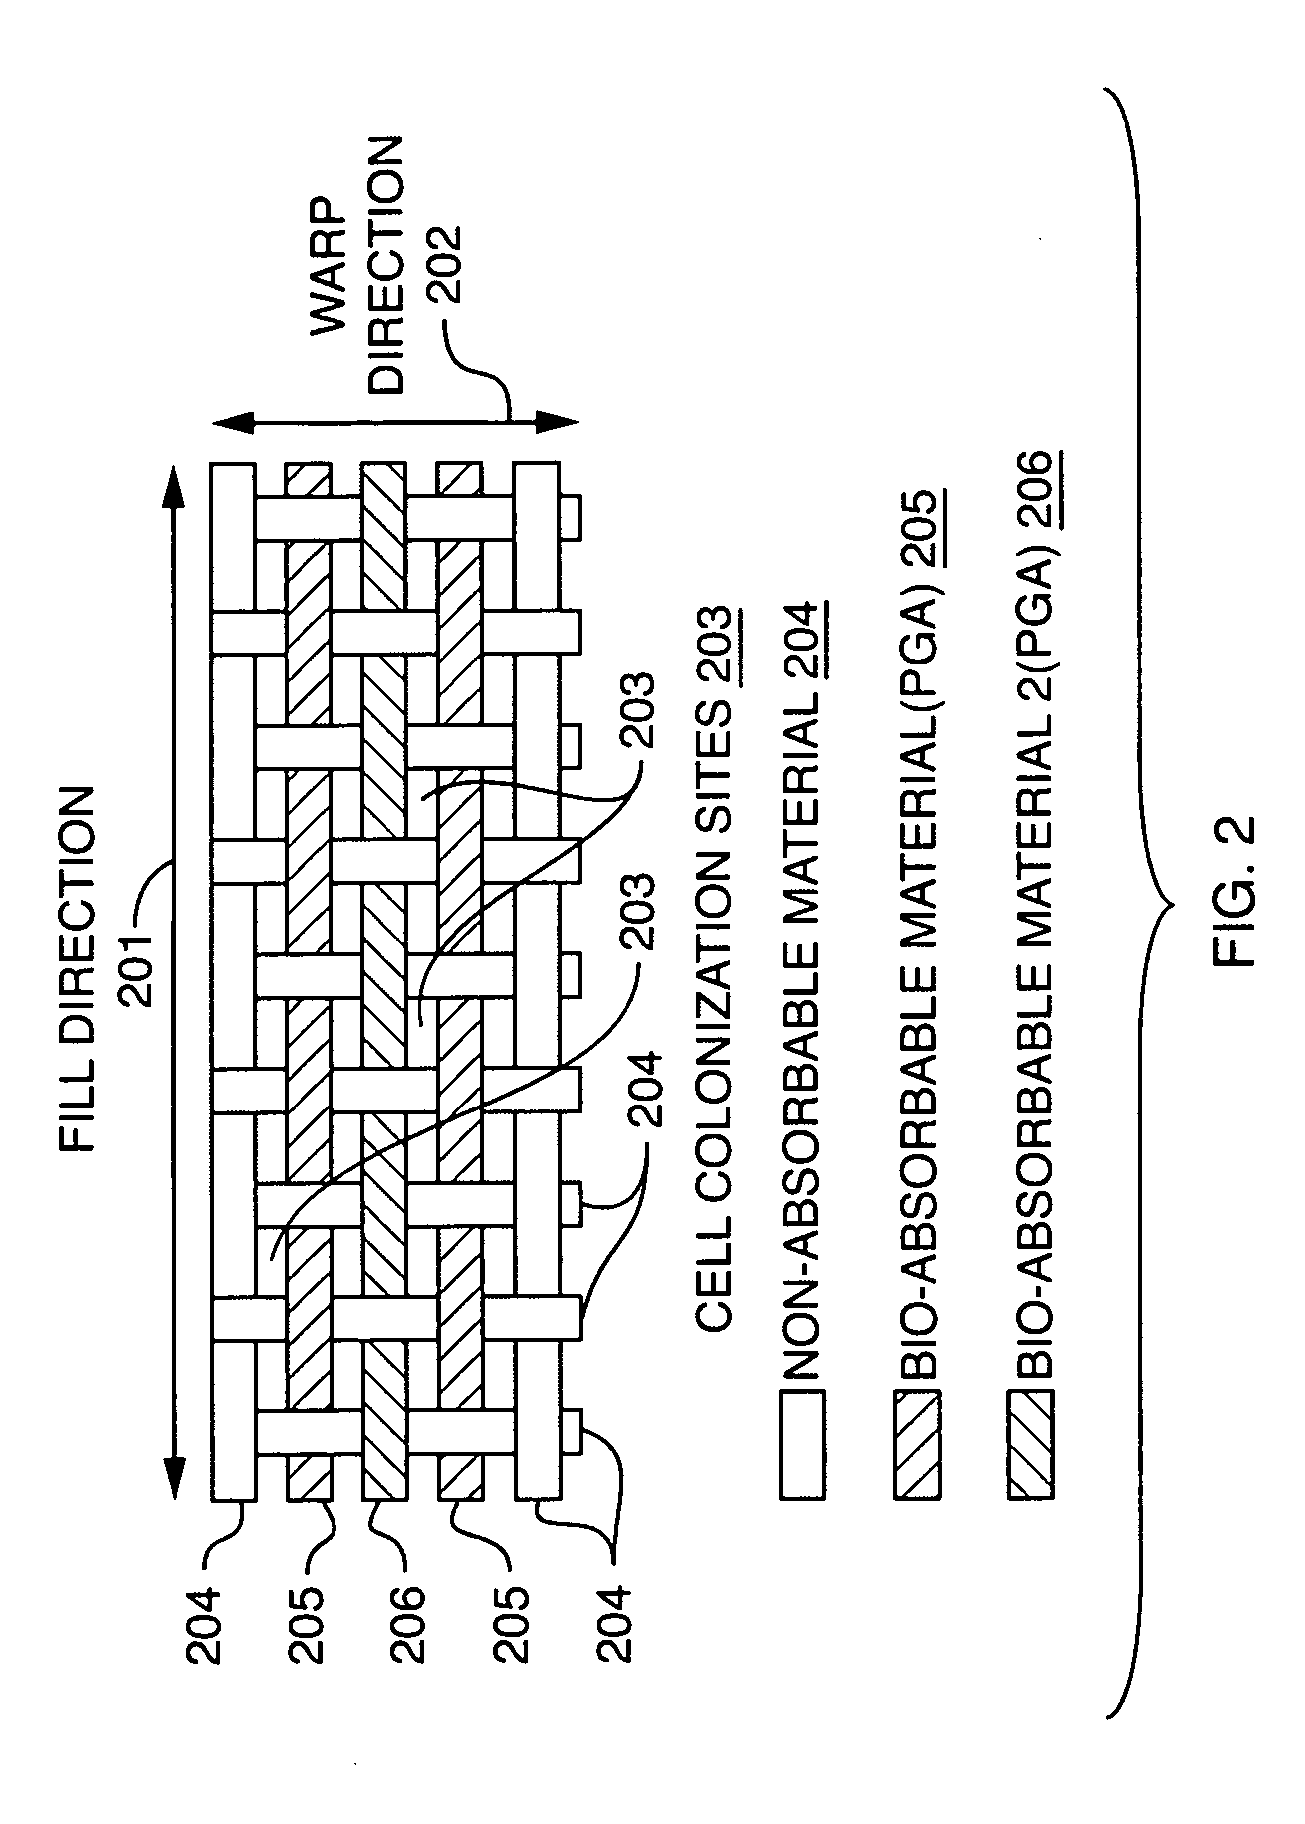 Controlled absorption biograft material for autologous tissue support